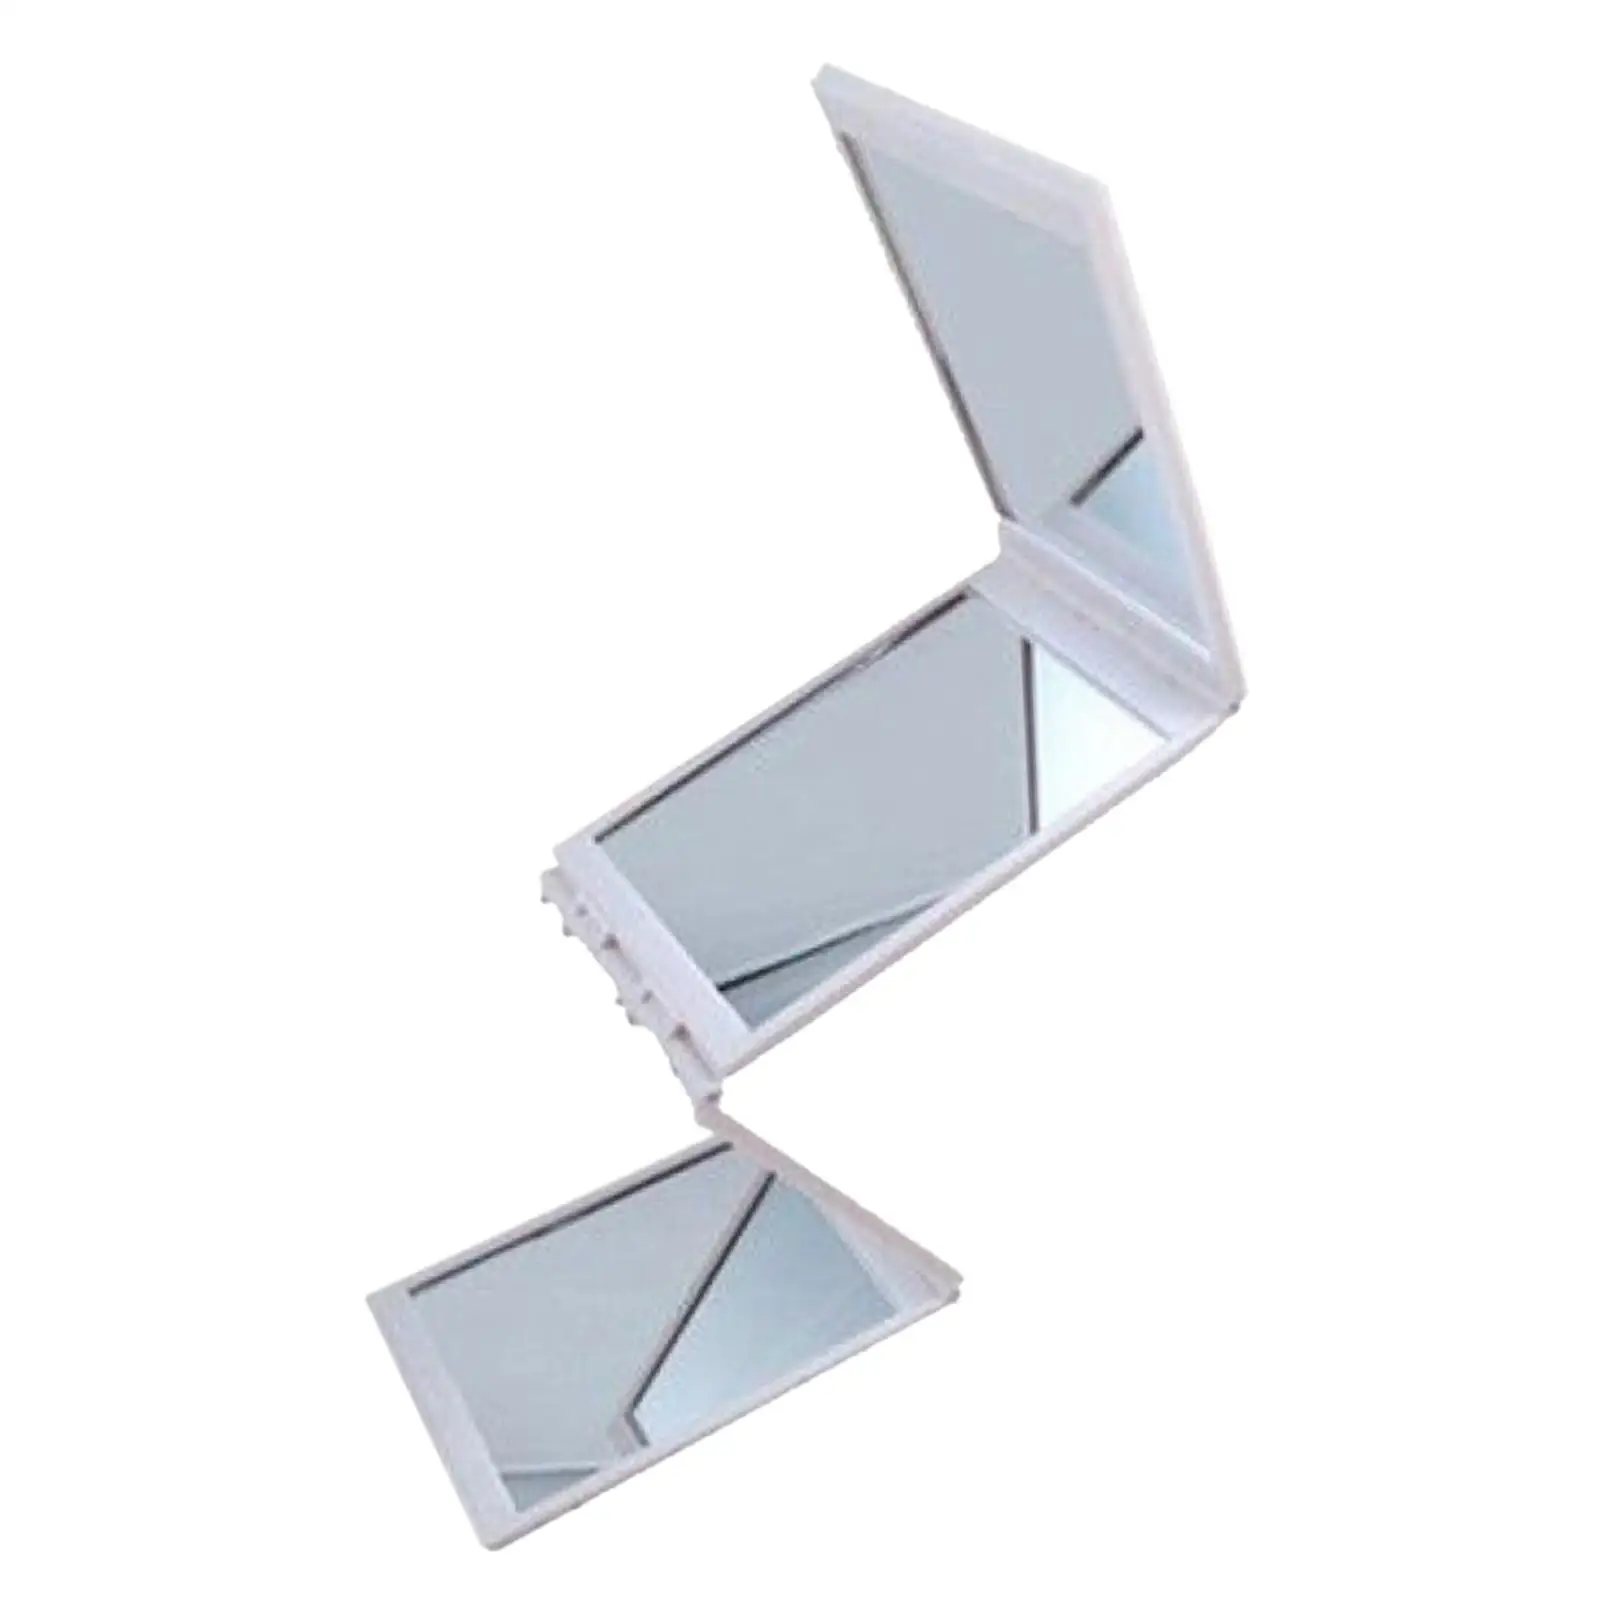 4 Sided Foldable Makeup Mirror Clear Travel for Skincare Bathroom Makeup